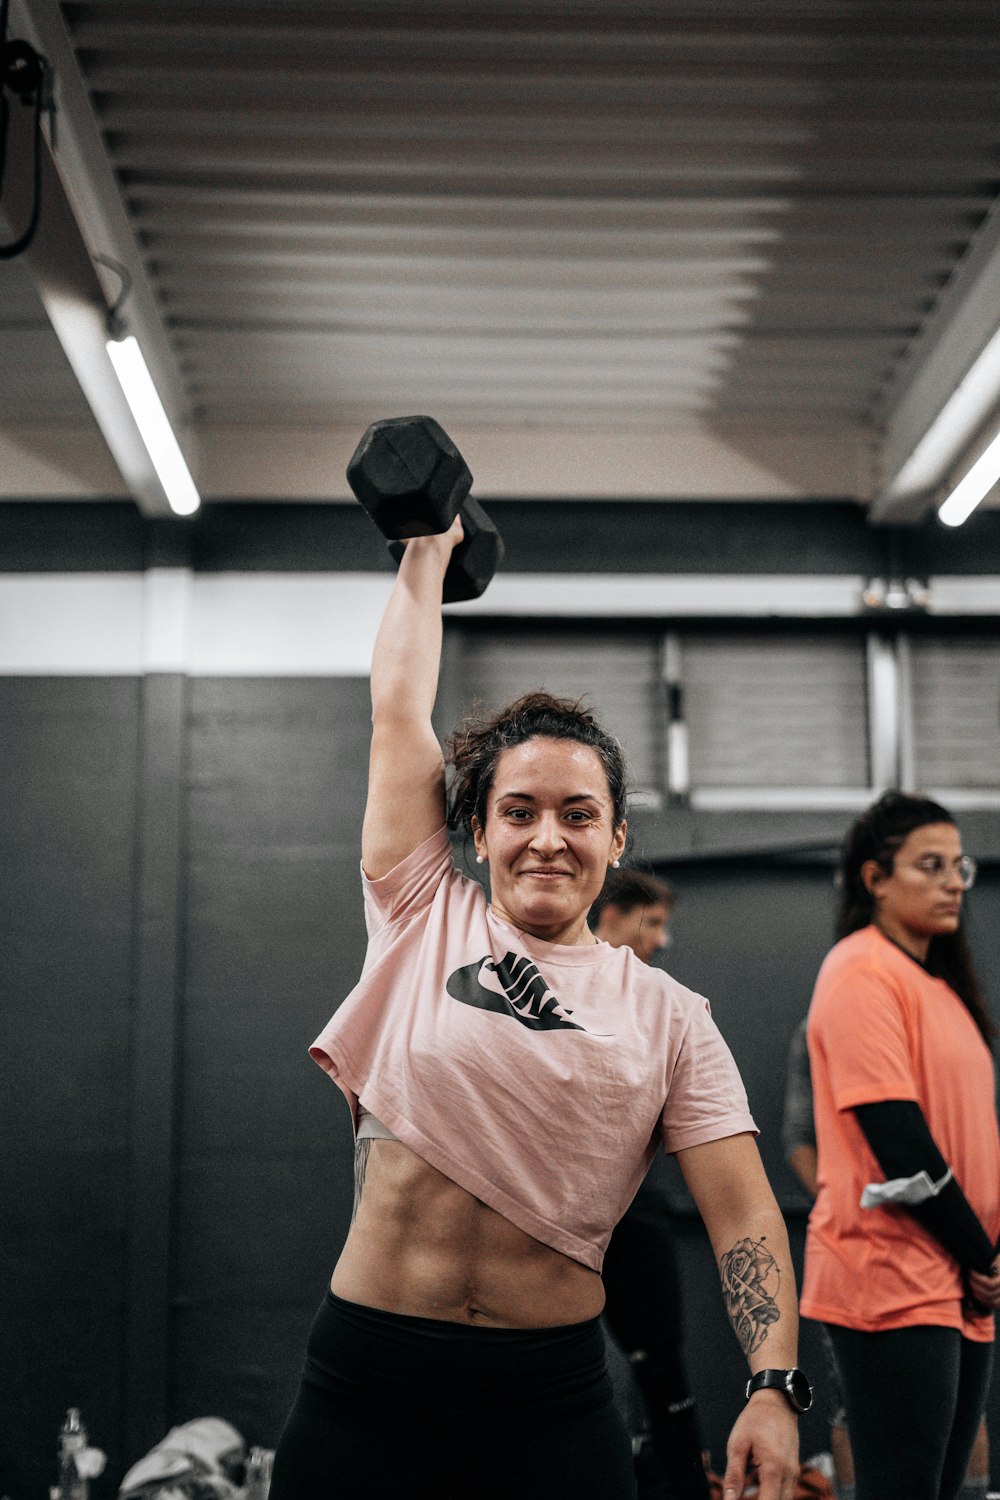 a woman lifting a black dumbbell in a gym